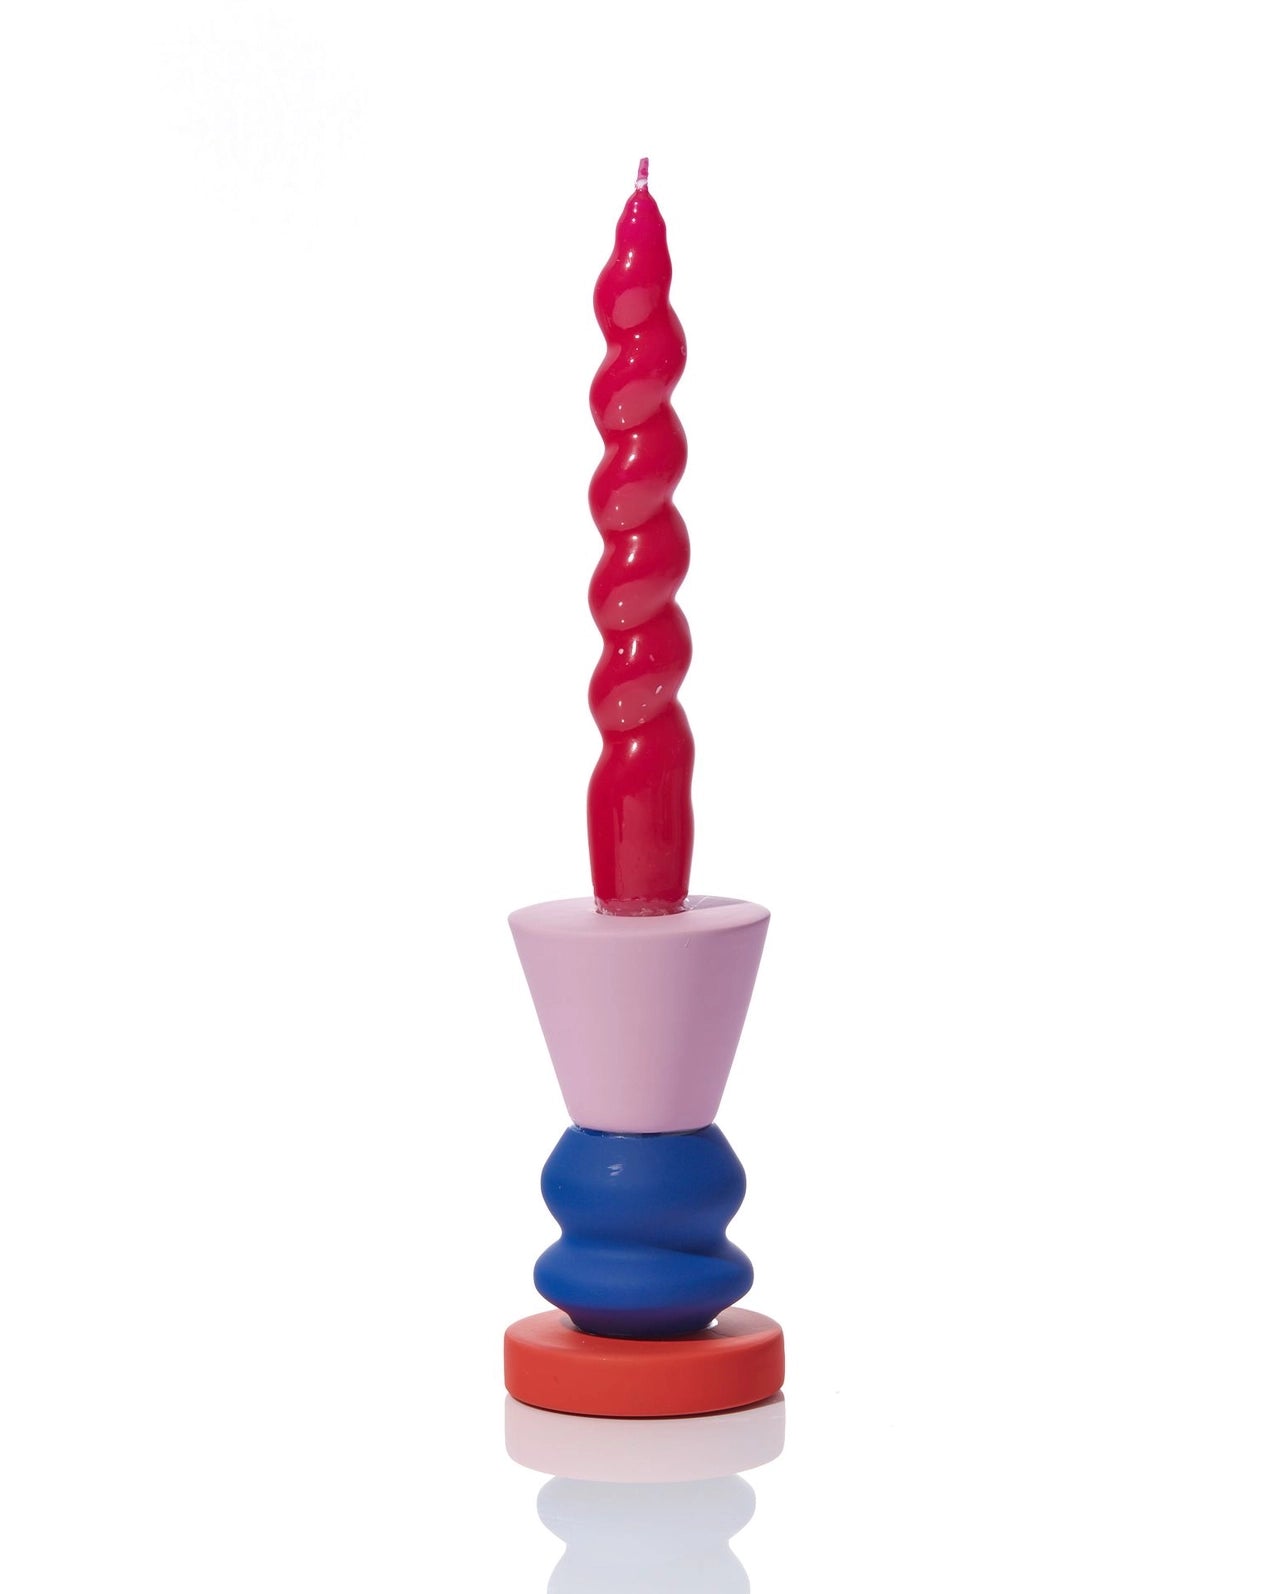 Maegan Stacks Candlestick, Small – Cobalt. with candle